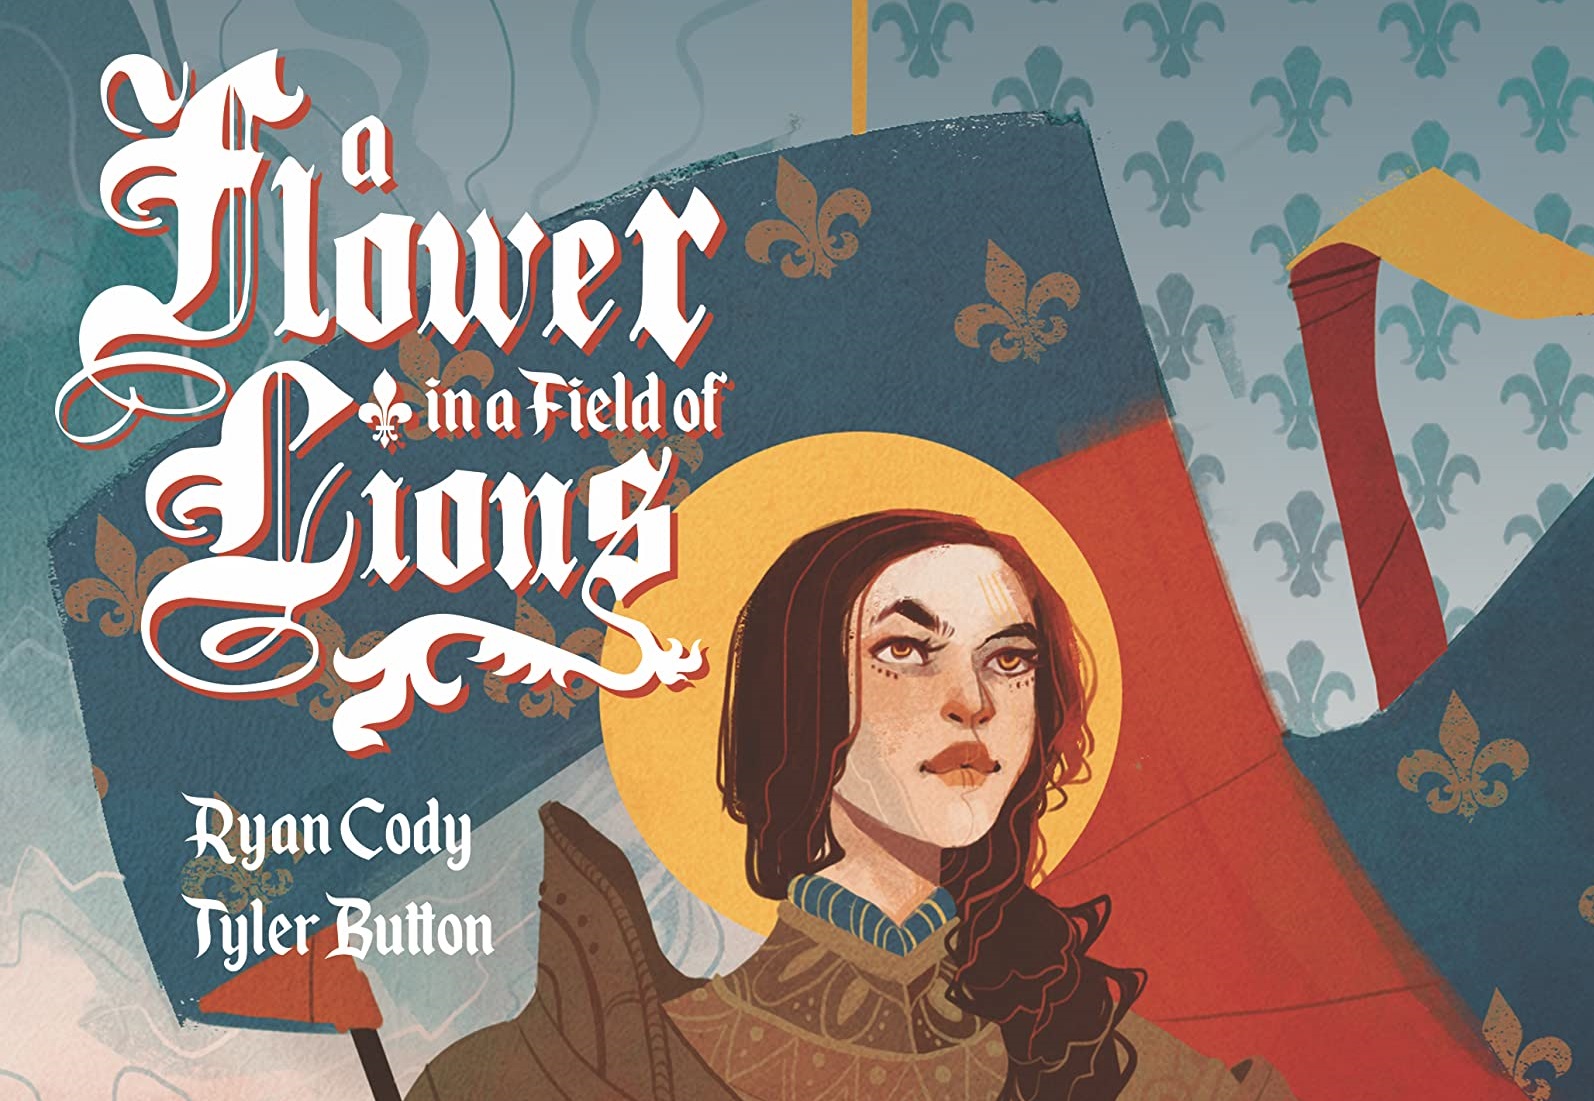 A Flower in a Field of Lions: The Trials of Joan of Arc